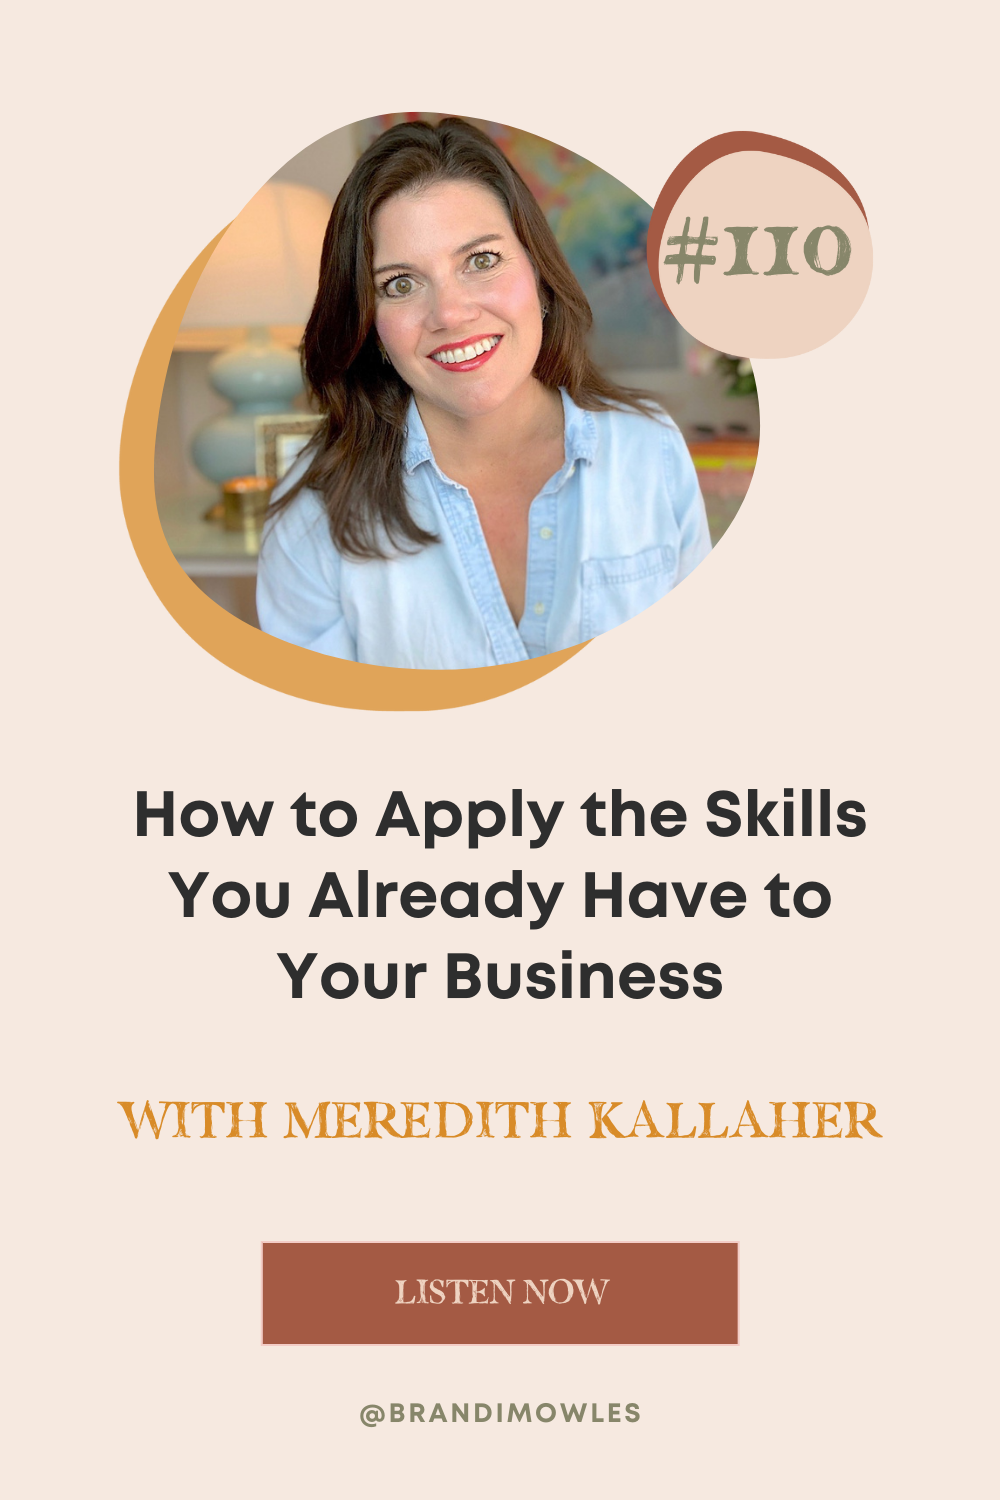 pply the Skills You Already Have to Your Business